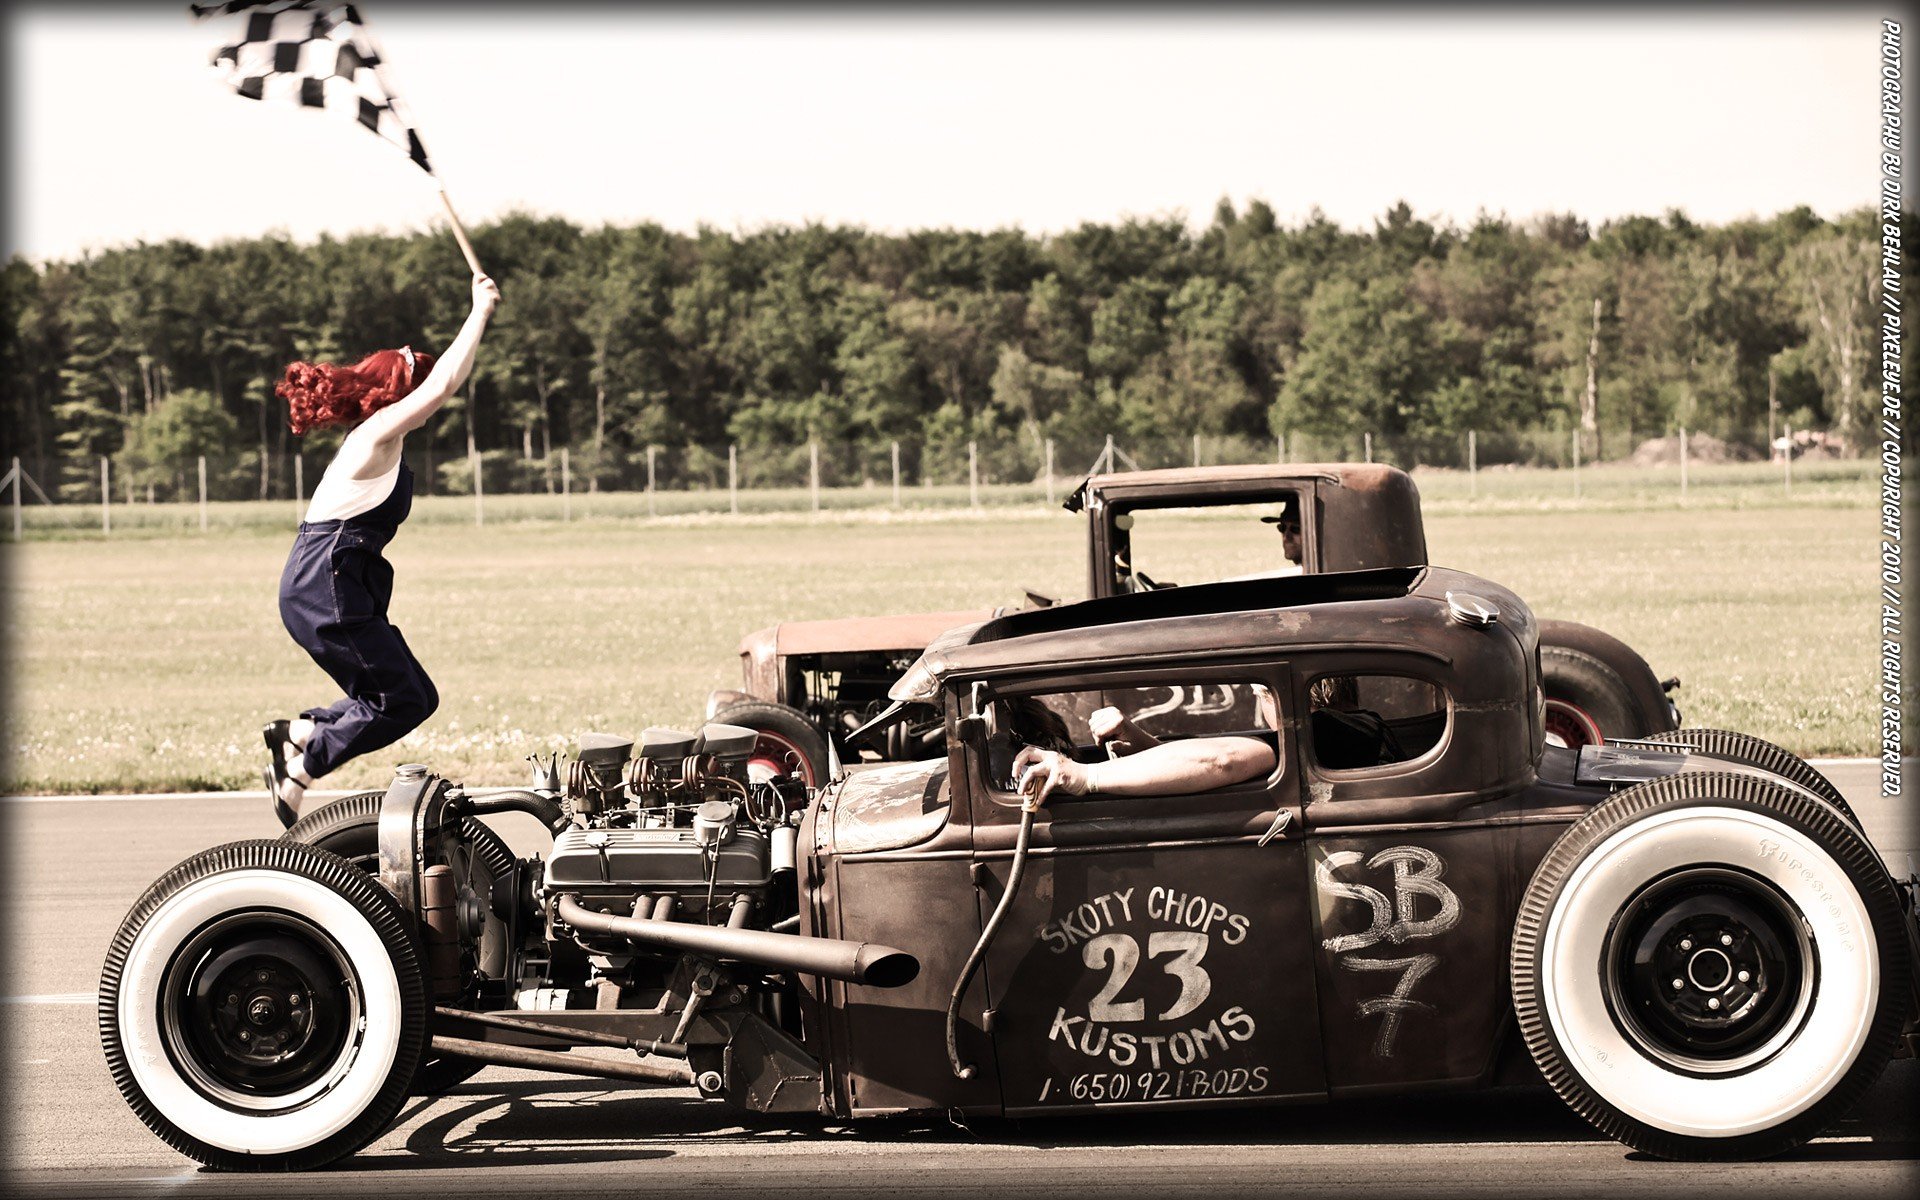 Hot Rod Screensavers And Wallpaper On